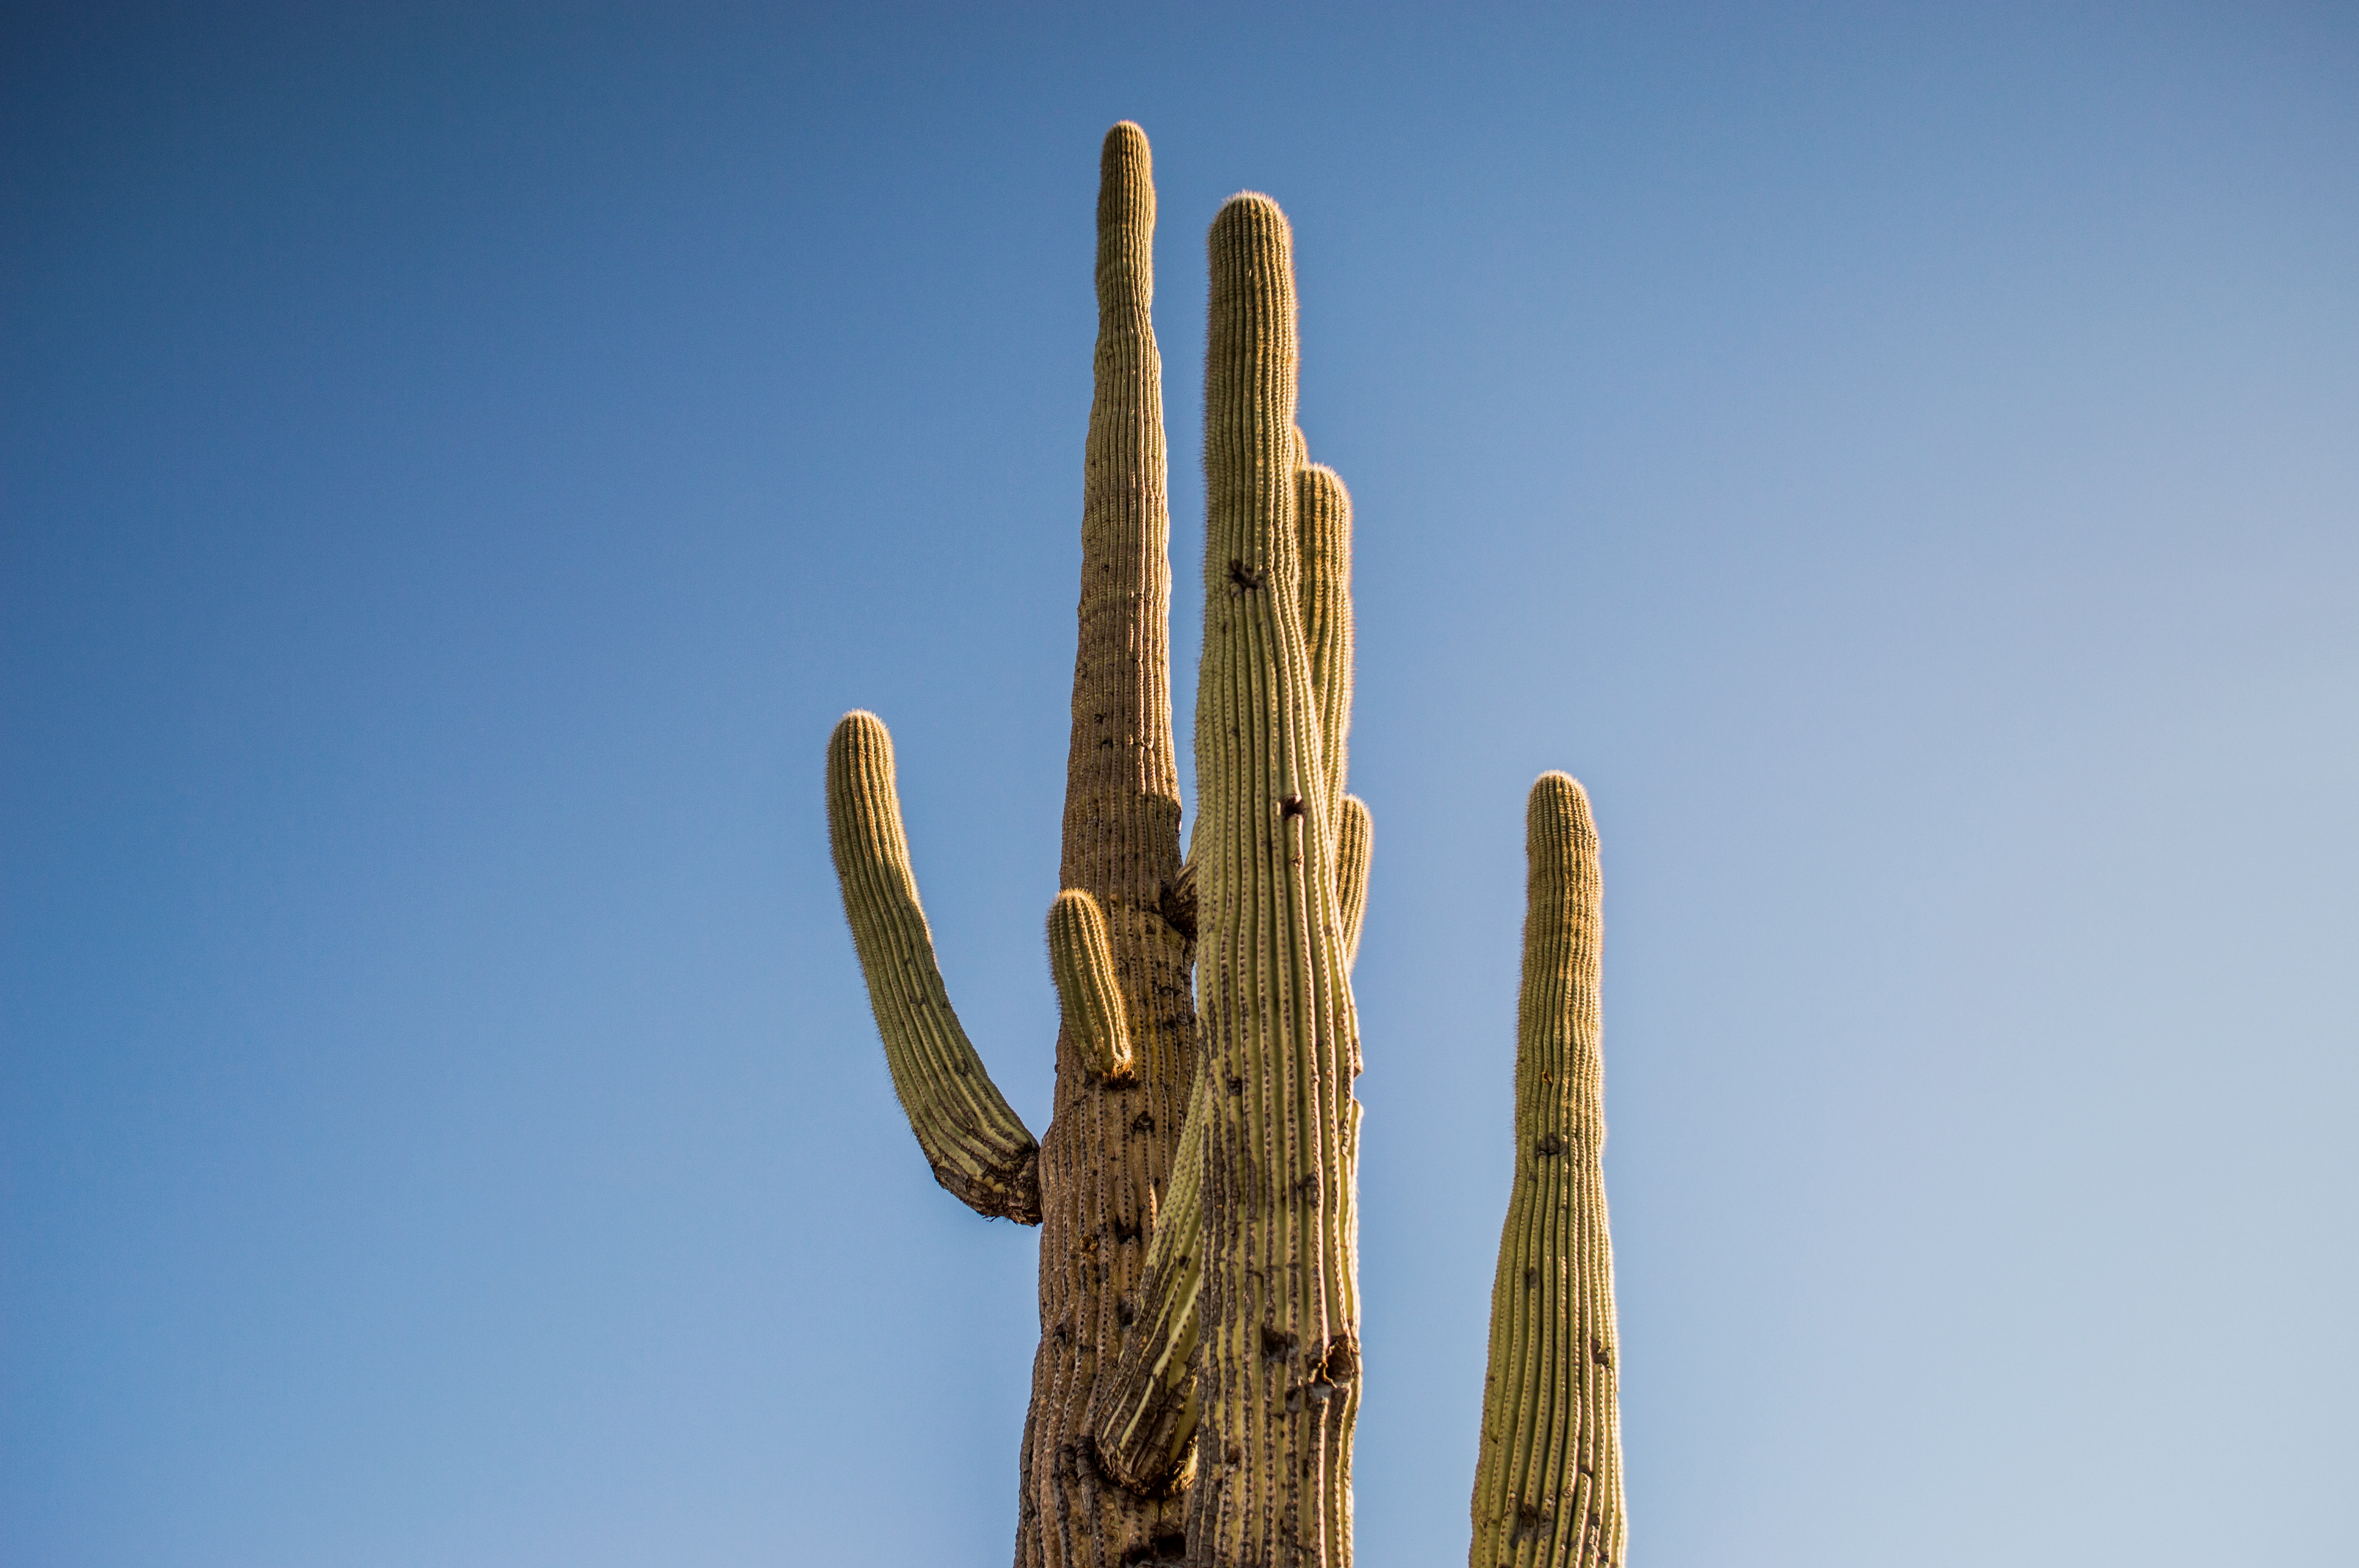 photo of cactus plant during daytime